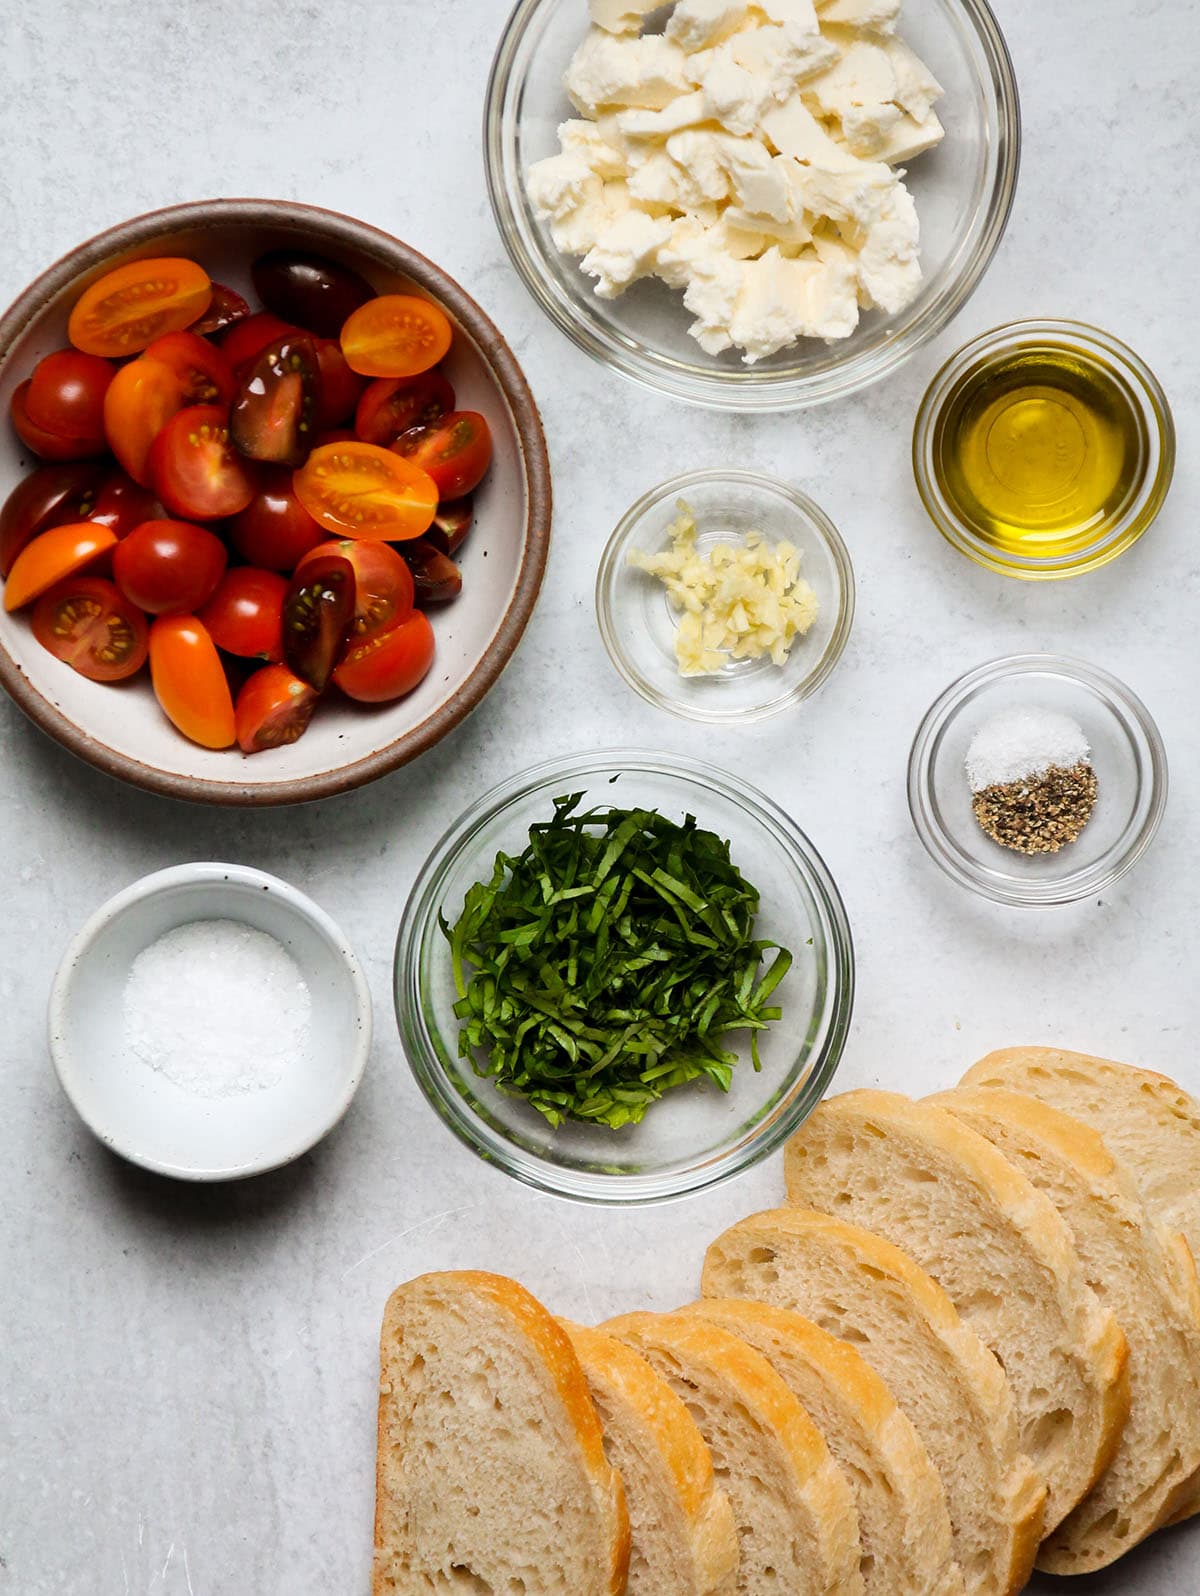 Warm bruschetta ingredients, measured into individual glass bowls on a white table.